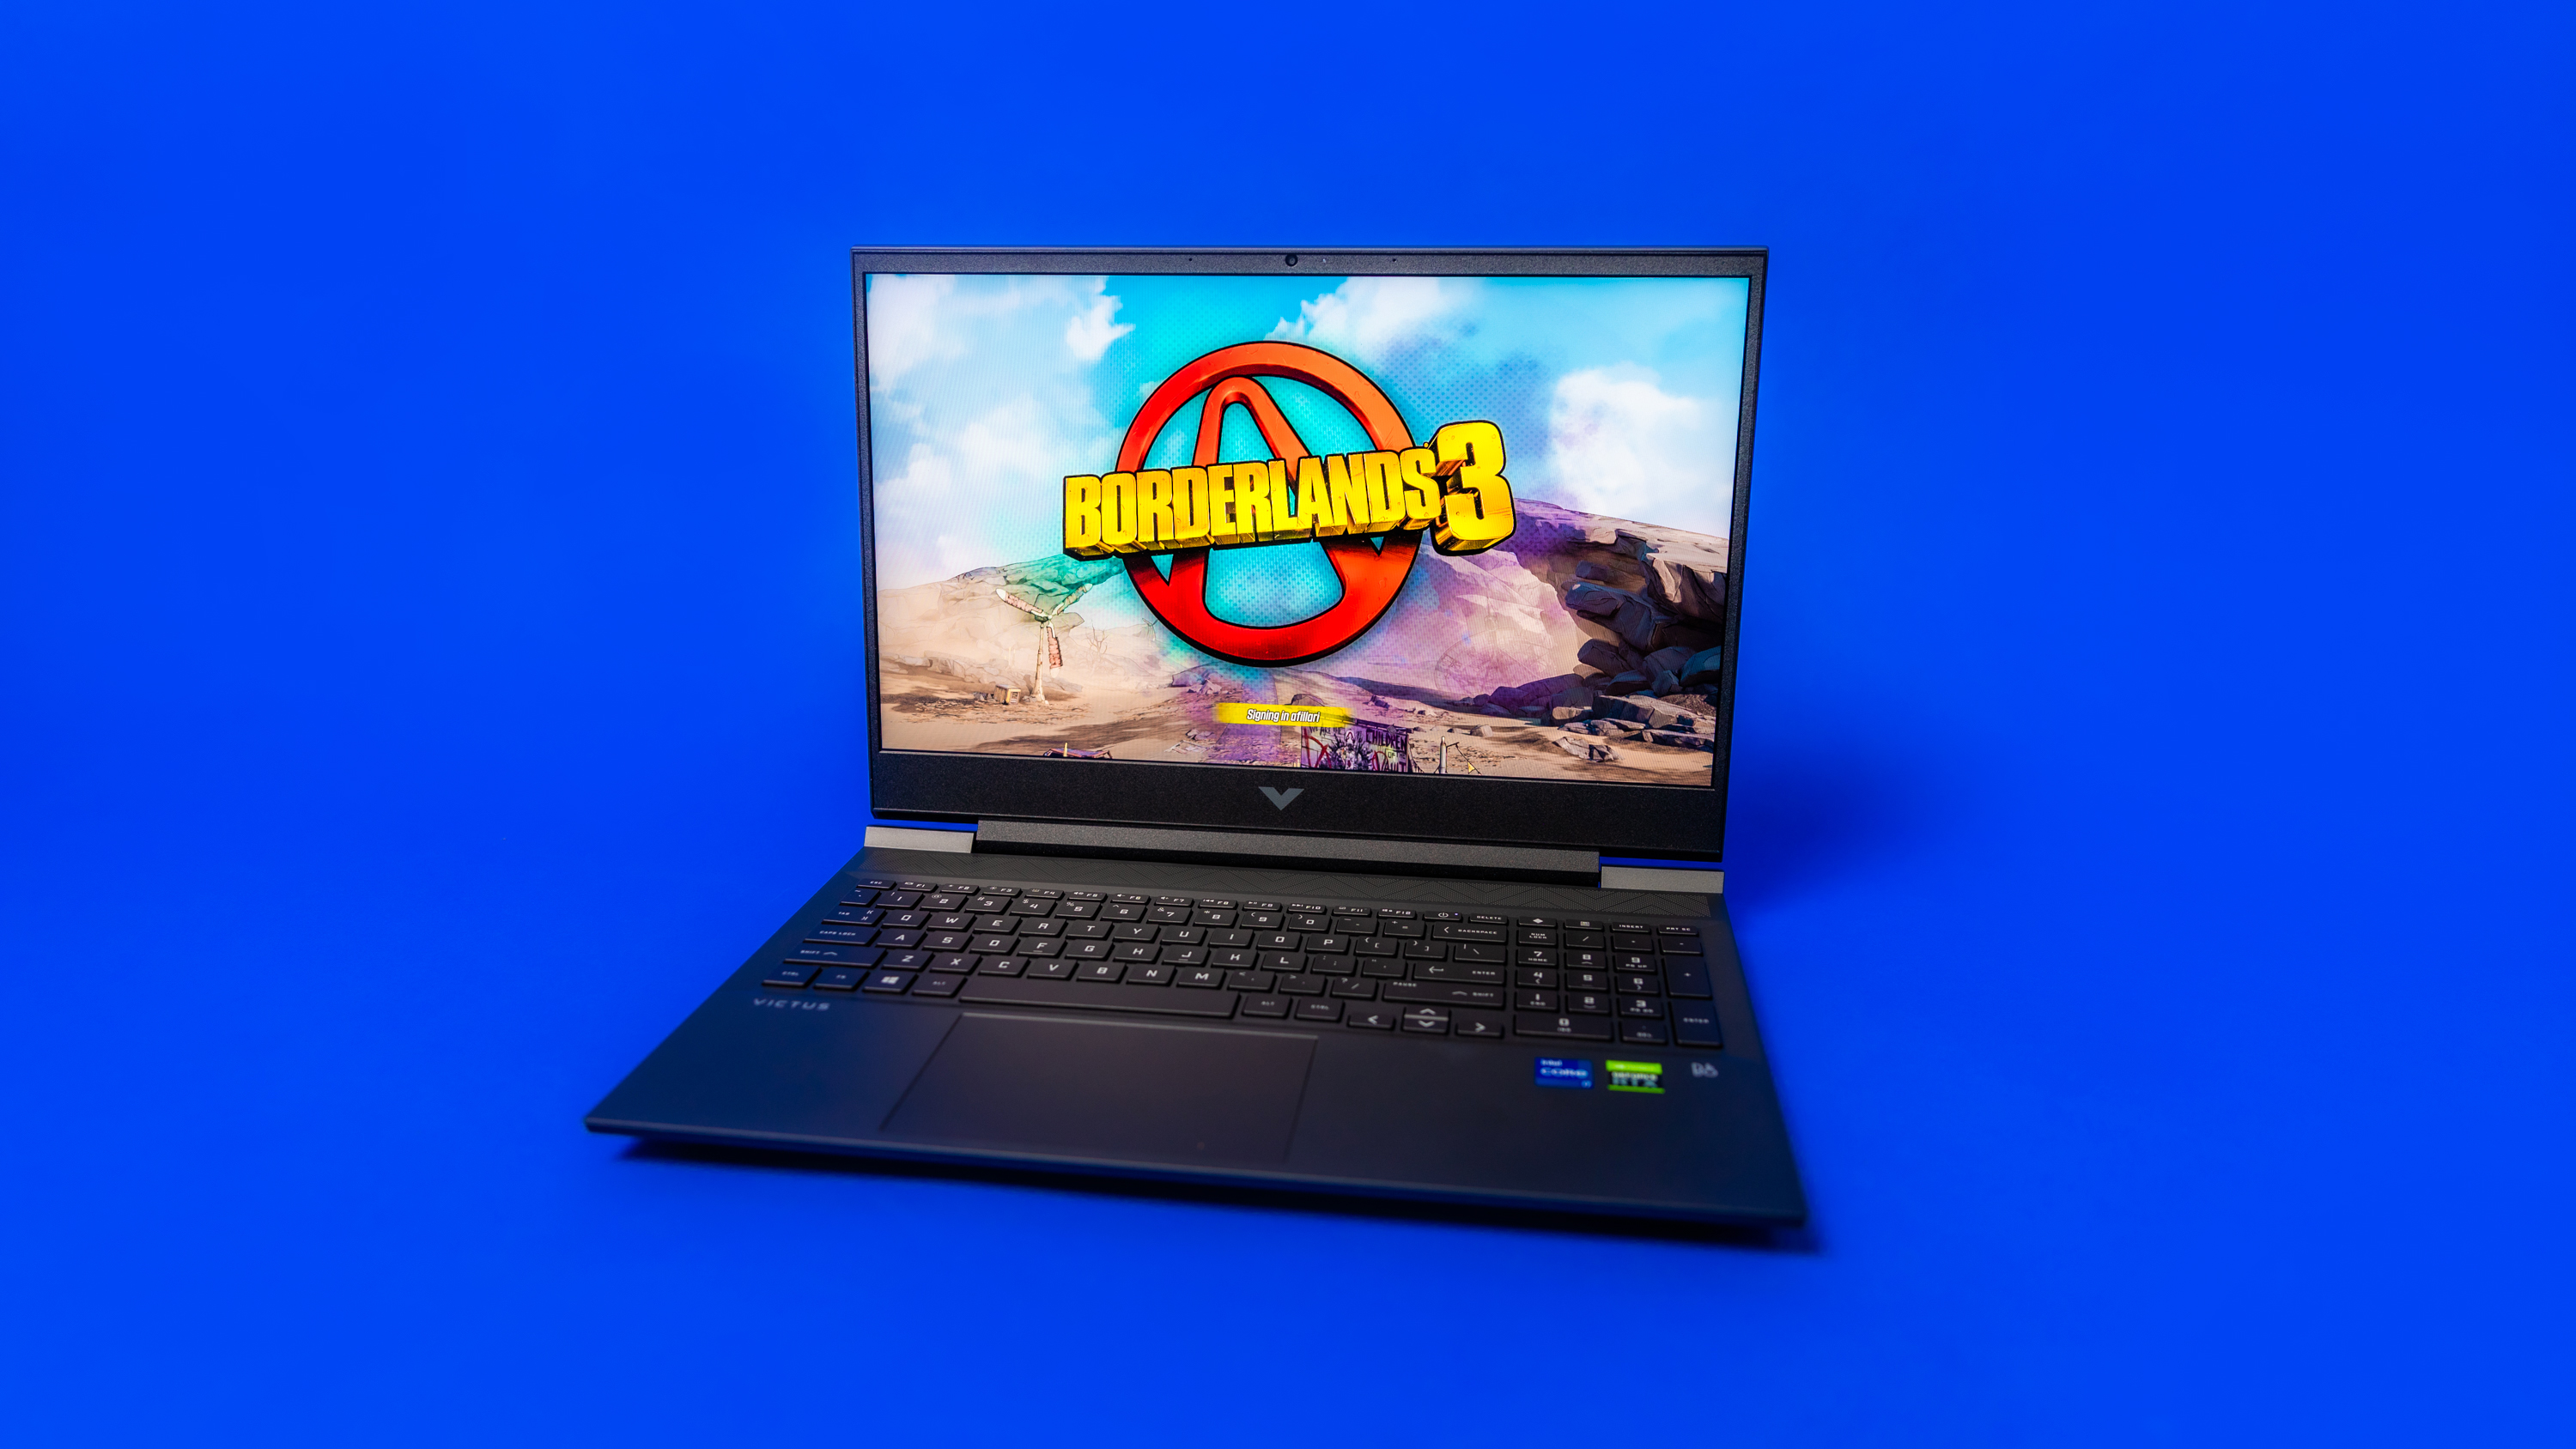 20 Ways to Improve Gaming Performance on Your Laptop